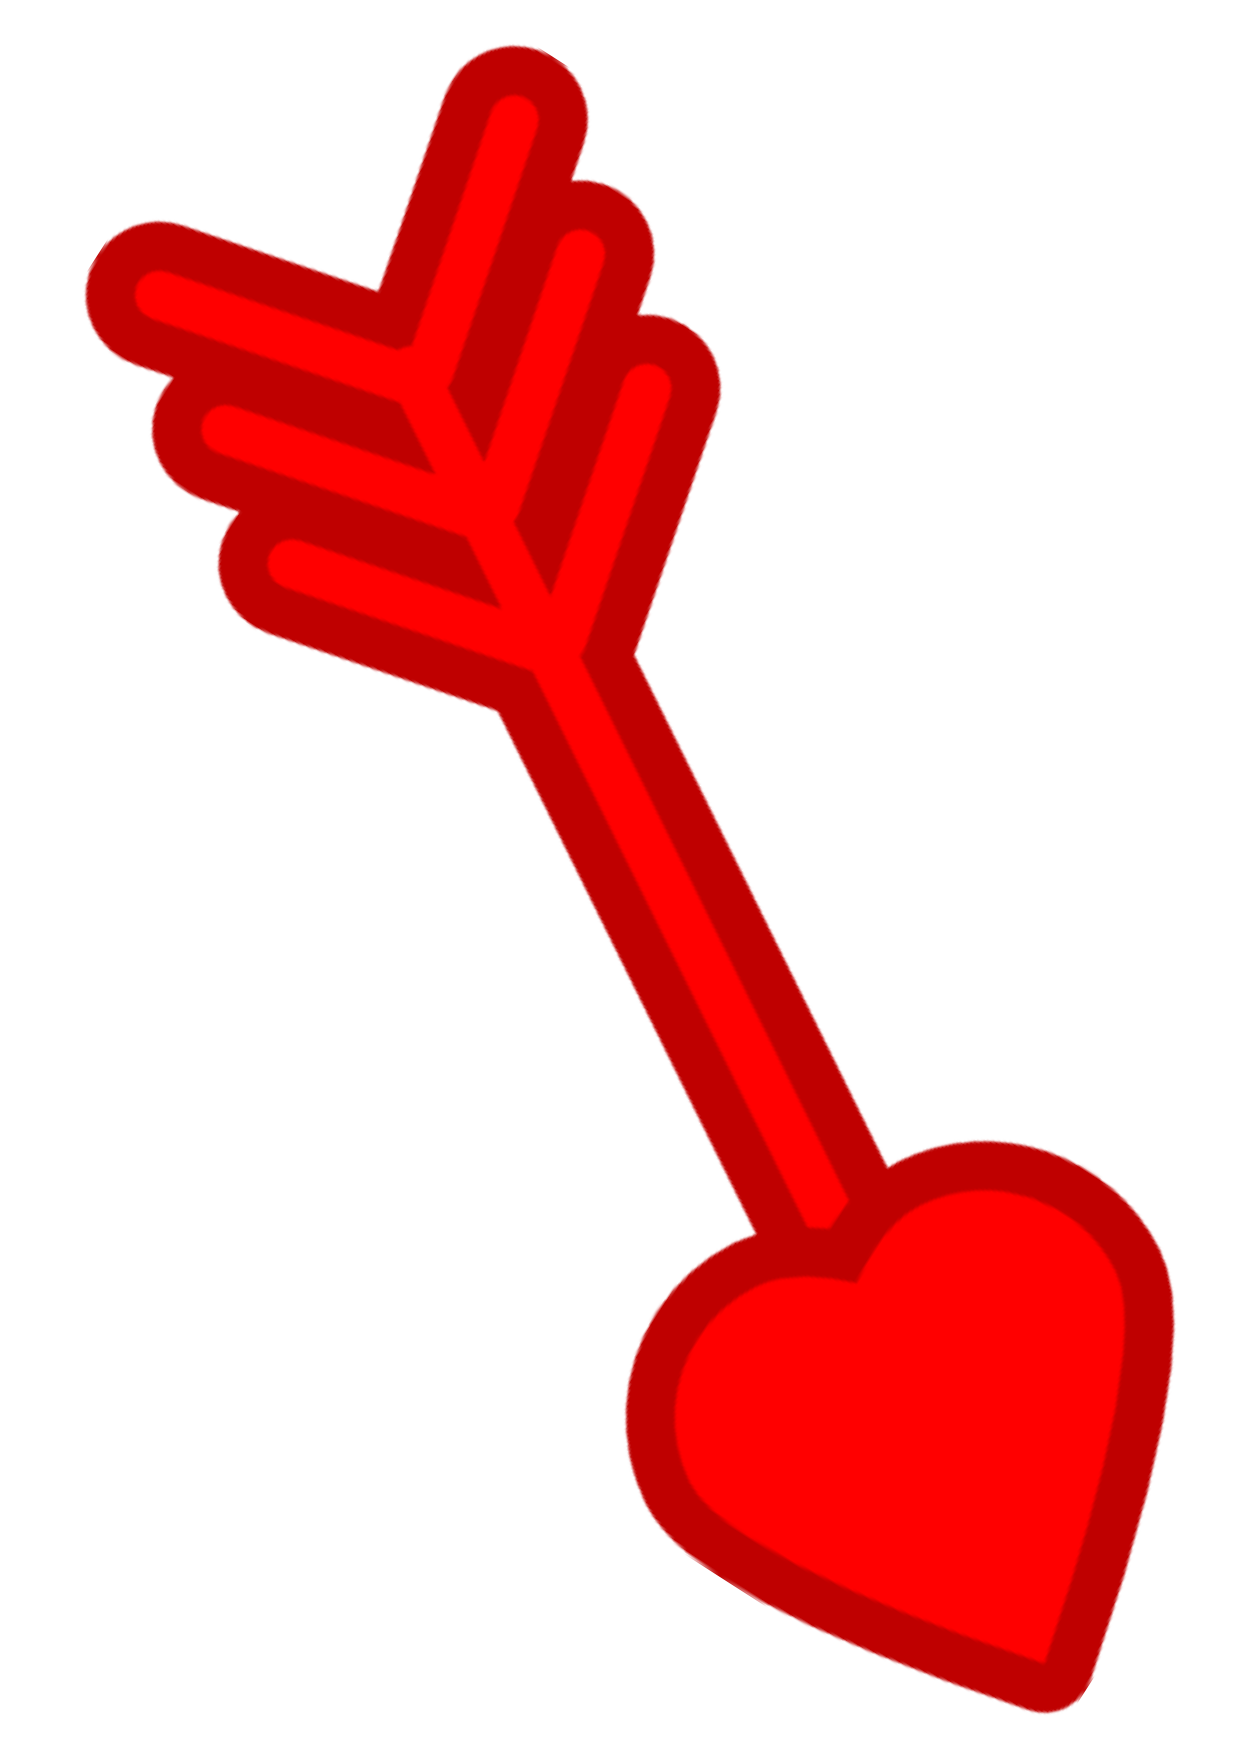 Download PNG image - Heart Cupid Arrow Transparent Background 